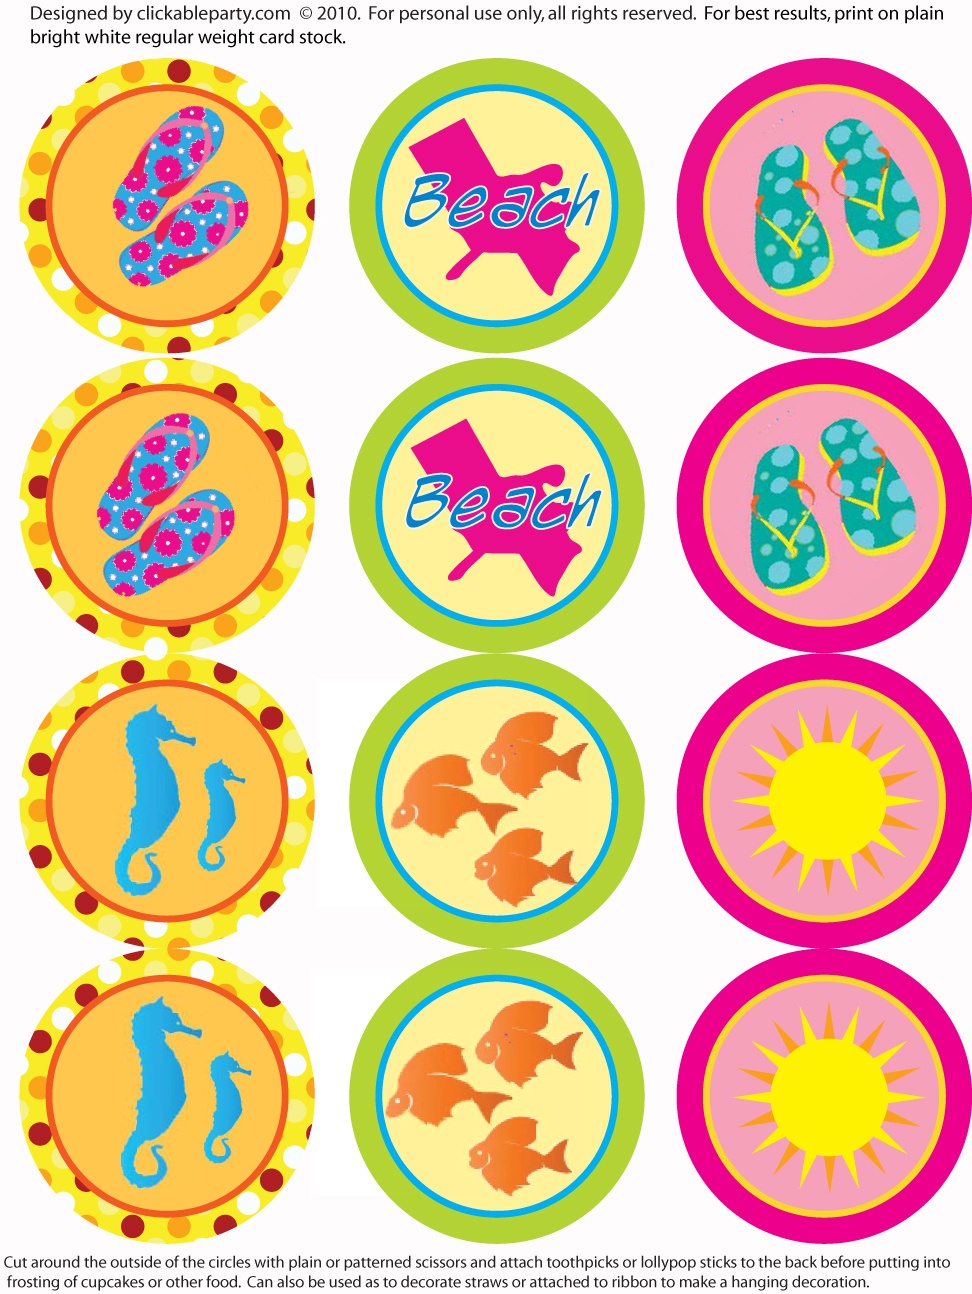 Free Summer Party Printables From Clickable Party | Catch My Party - Free Printable Party Circles